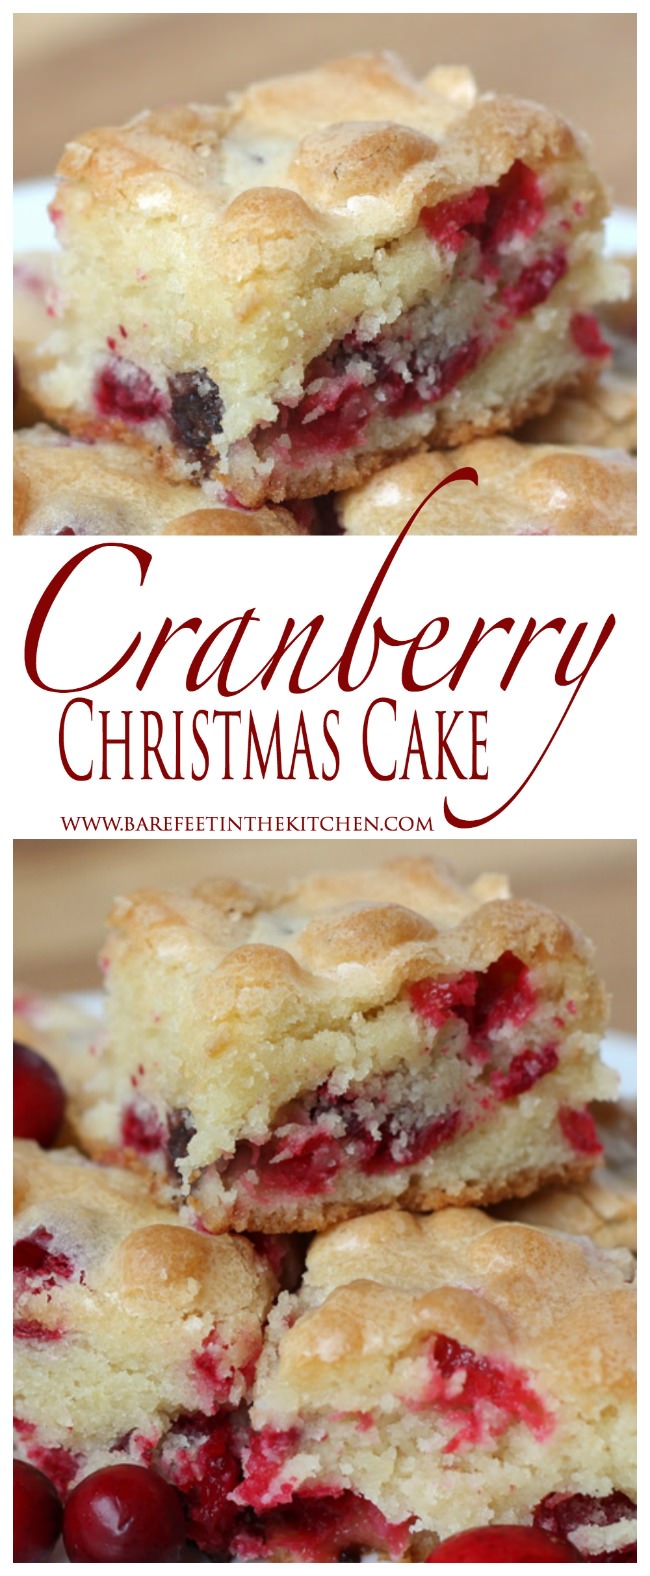 Cranberry Christmas Cake | Heavenly Delight ⋆ Food Curation